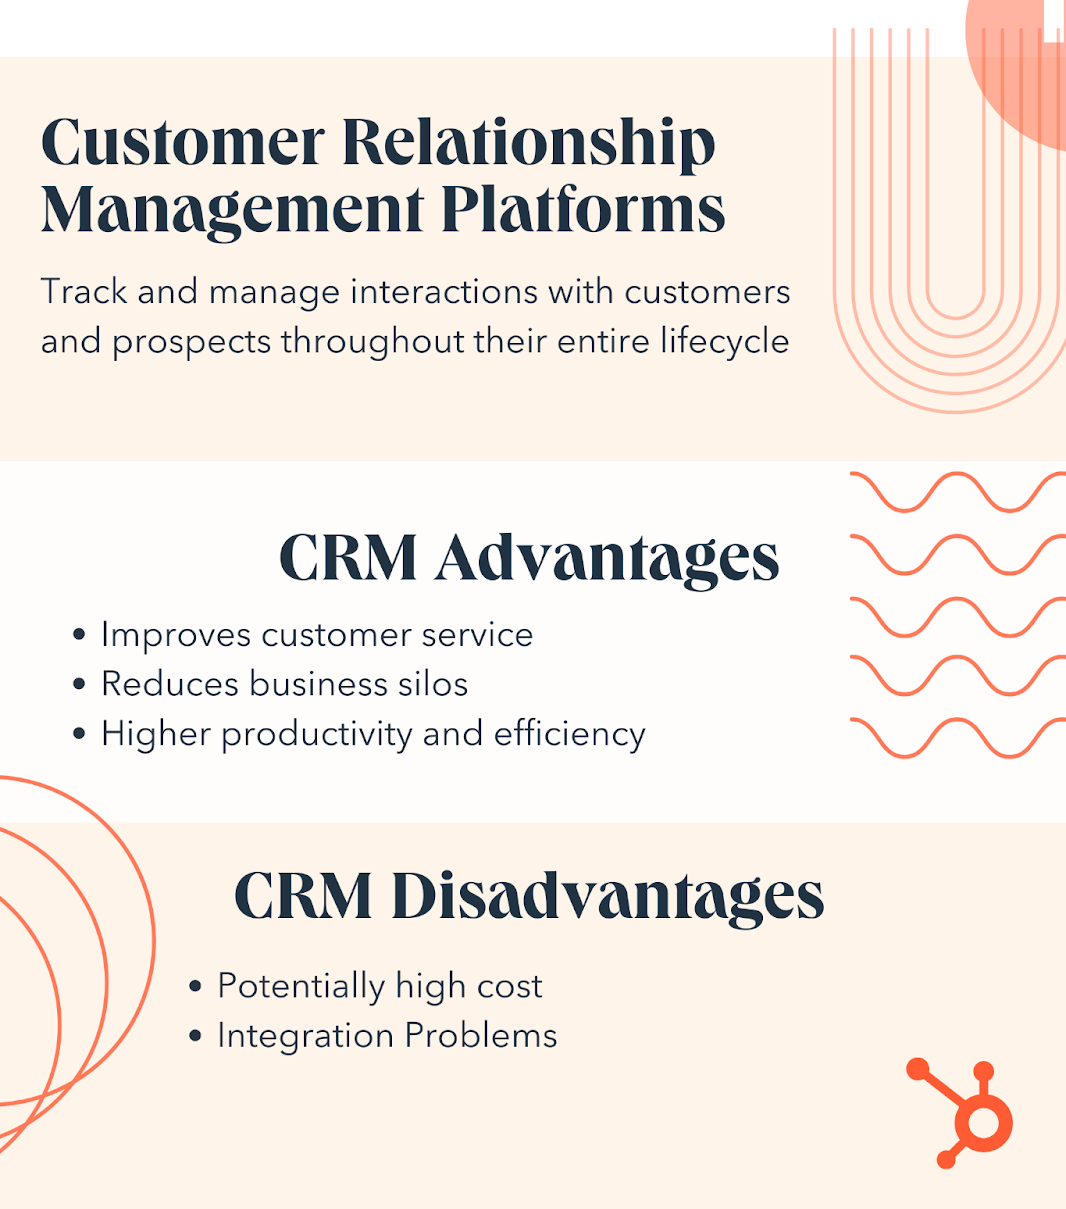 CRM, track and manage interactions with customers and prospects throughout their lifecycle